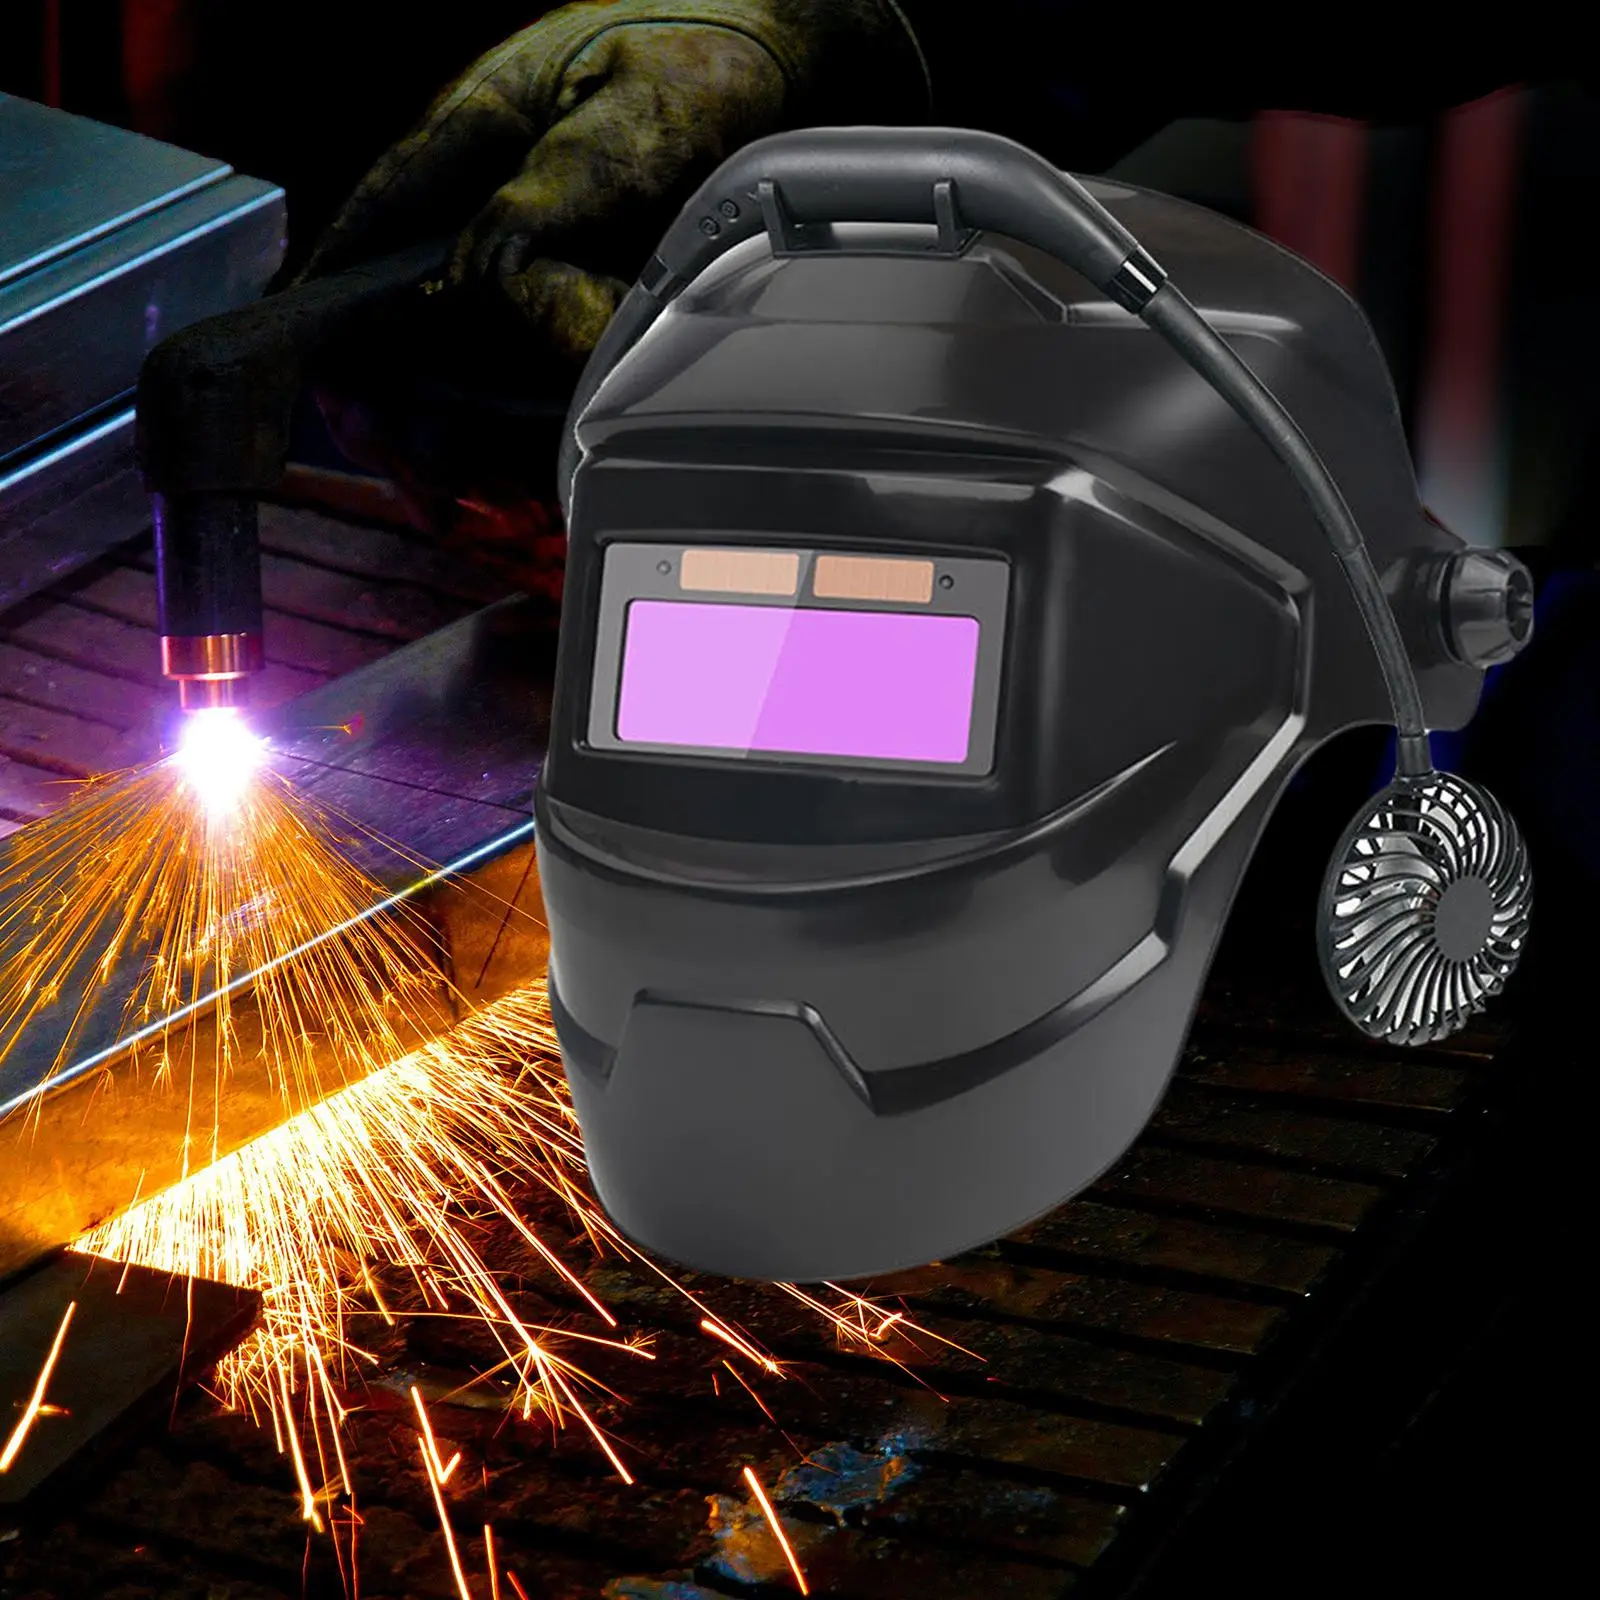 Welding Face Cover Hood Automatic Variable Light Multipurpose Comfortable Overhead Protection Adjustable for TIG Mig ARC